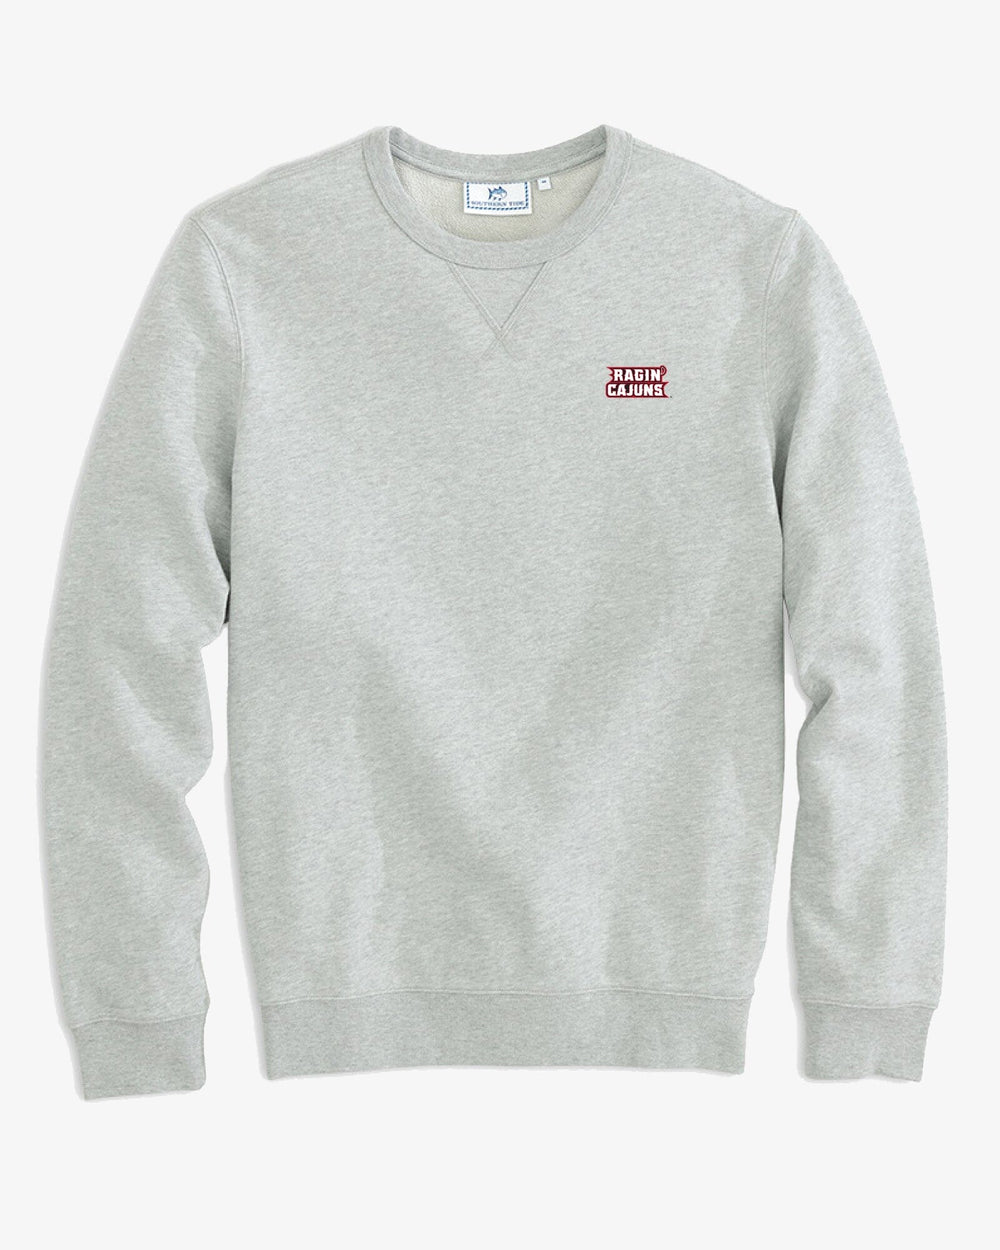 The front view of the University of Louisiana-Lafayette Upper Deck Pullover Sweatshirt by Southern Tide - Heather Slate Grey